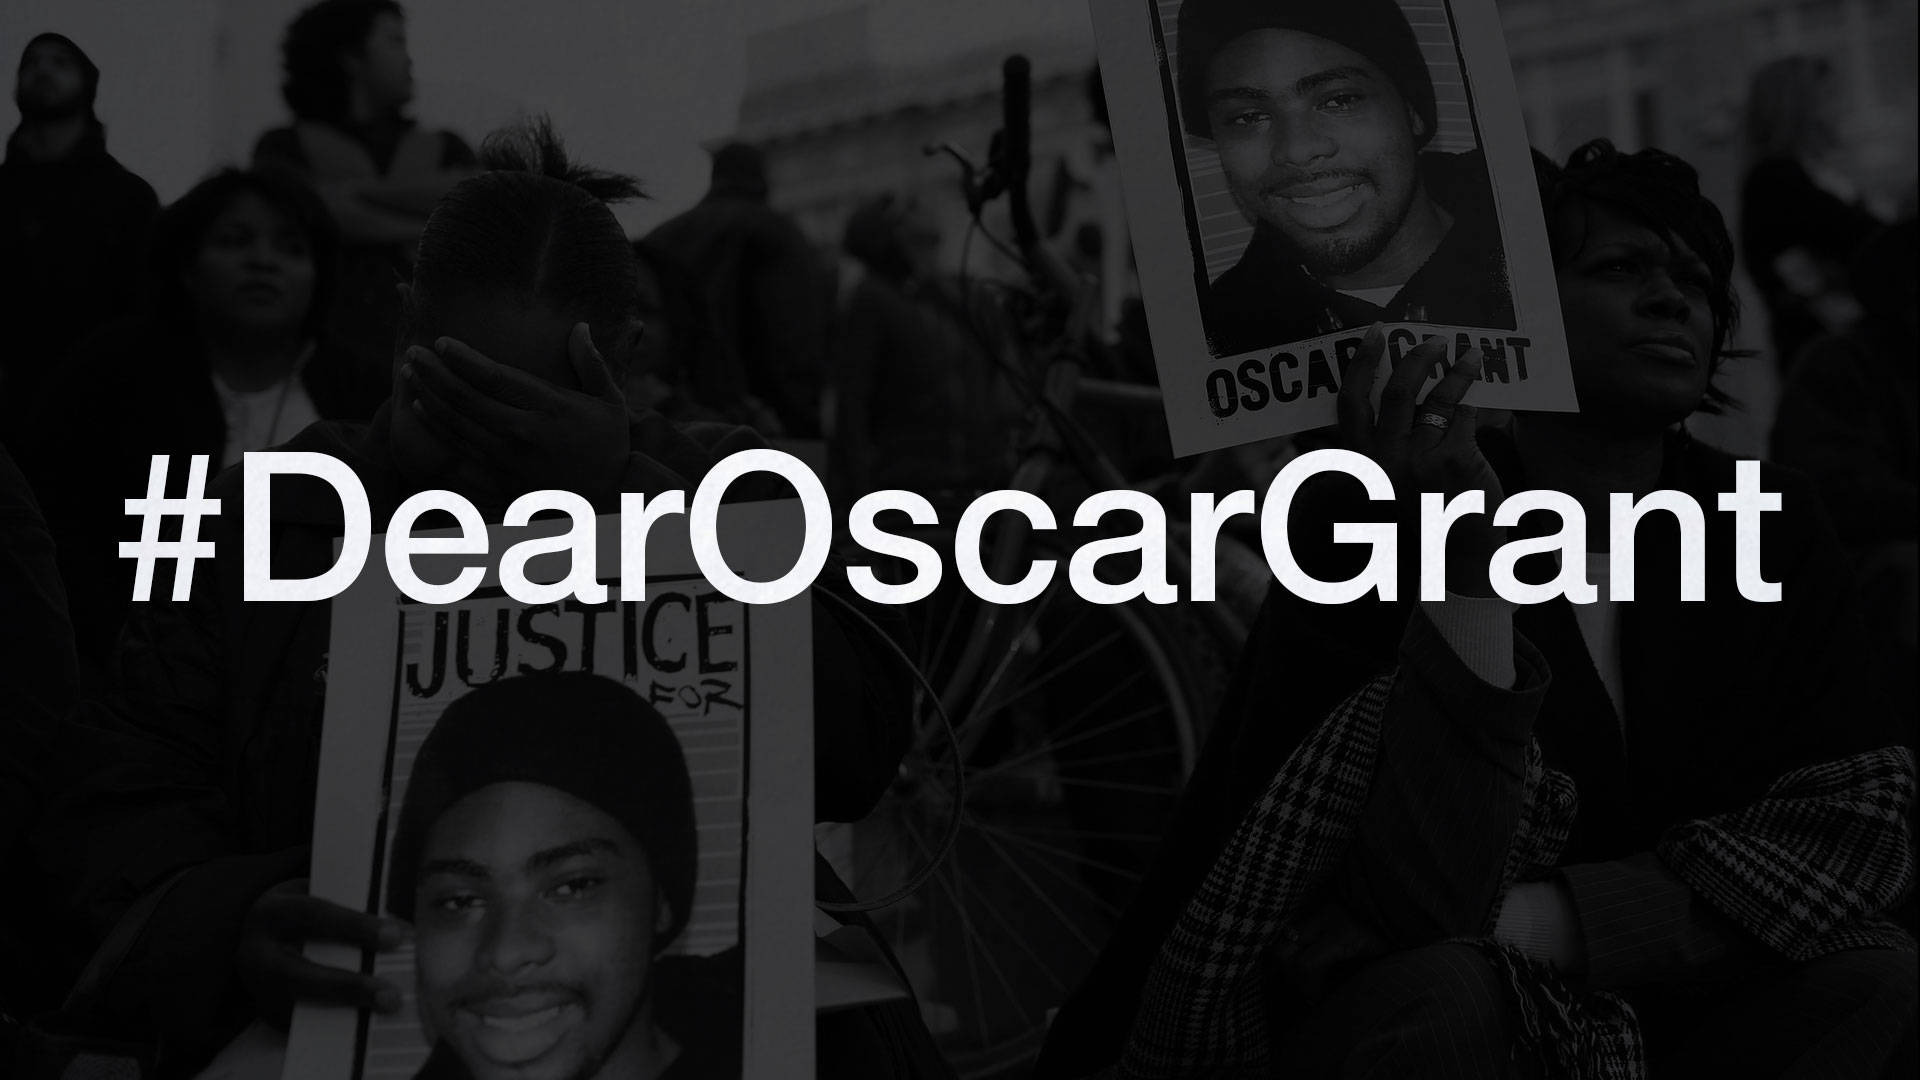 If you could tell Oscar Grant anything 10 years after his death, what would you say? Justin Sullivan/Getty Images